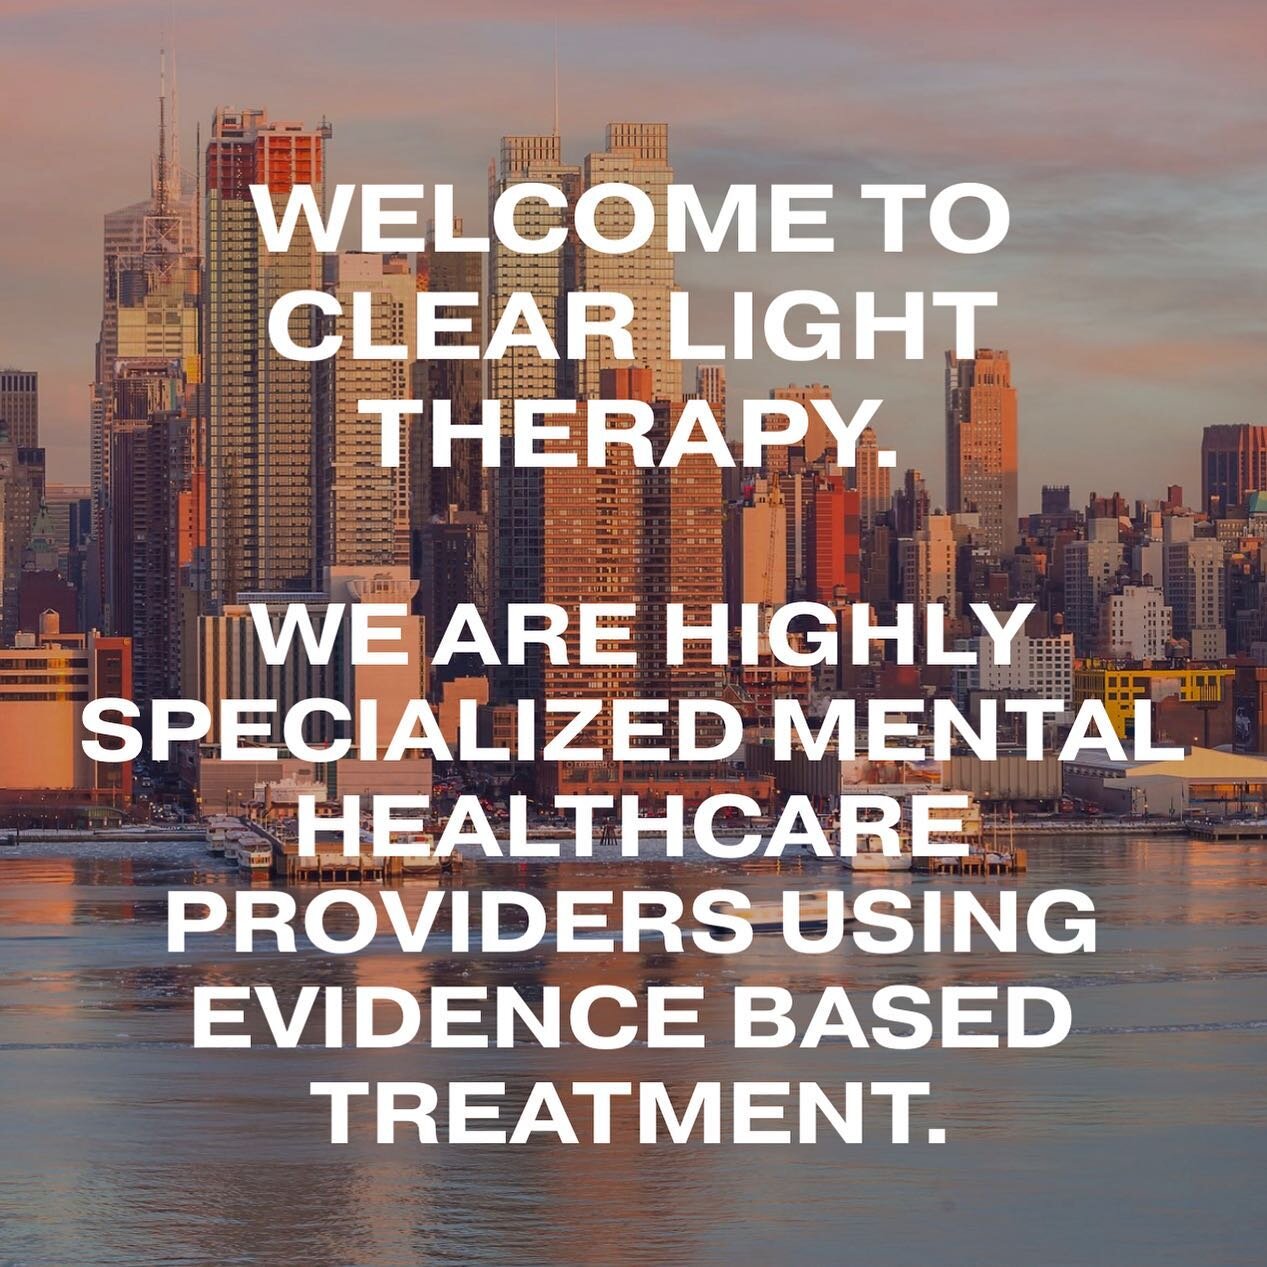 Curious about therapy? Our website has been recently updated with our specialties. We have hired two new therapists that specialize working with couples, addiction, teens/adolescents and the LGBTQ community. The group owner, Dana, continues to treat 